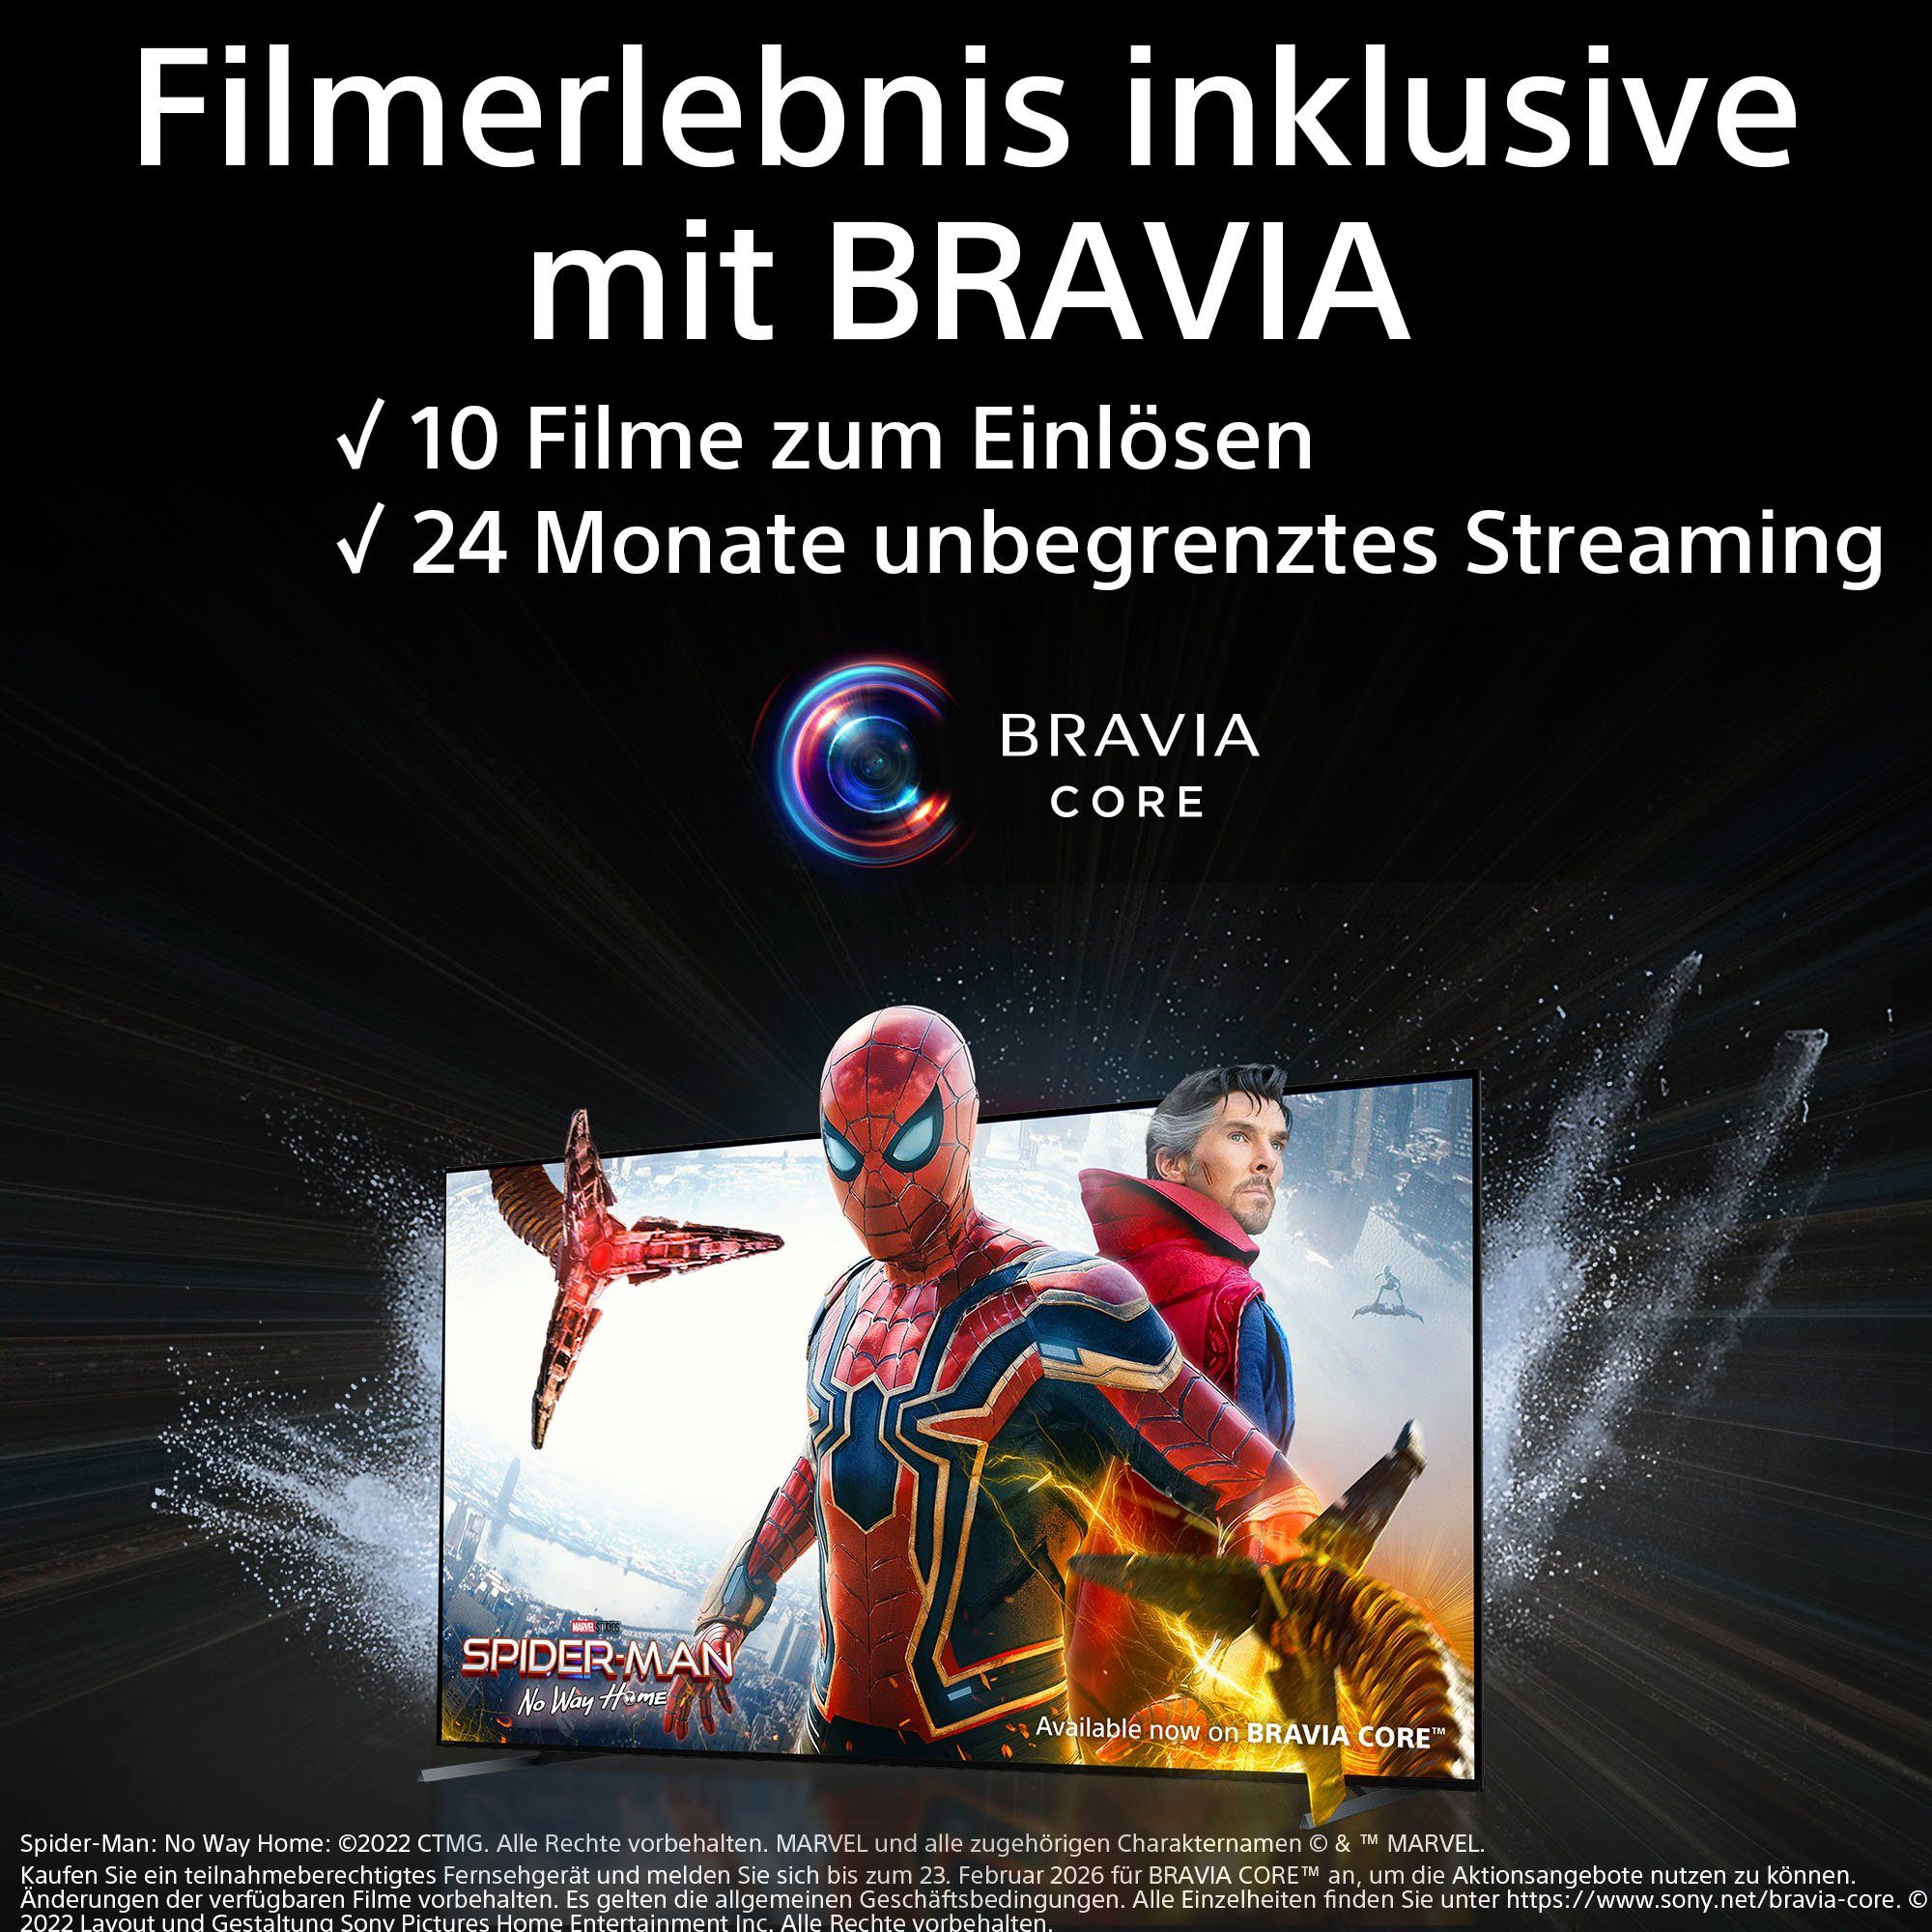 OLED-Fernseher TV, exklusiven Smart-TV, Android cm/65 HD, Zoll, PS5-Features) Smart-TV, XR-65A80L Google CORE, Sony BRAVIA mit (164 TRILUMINOS TV, PRO, 4K Ultra